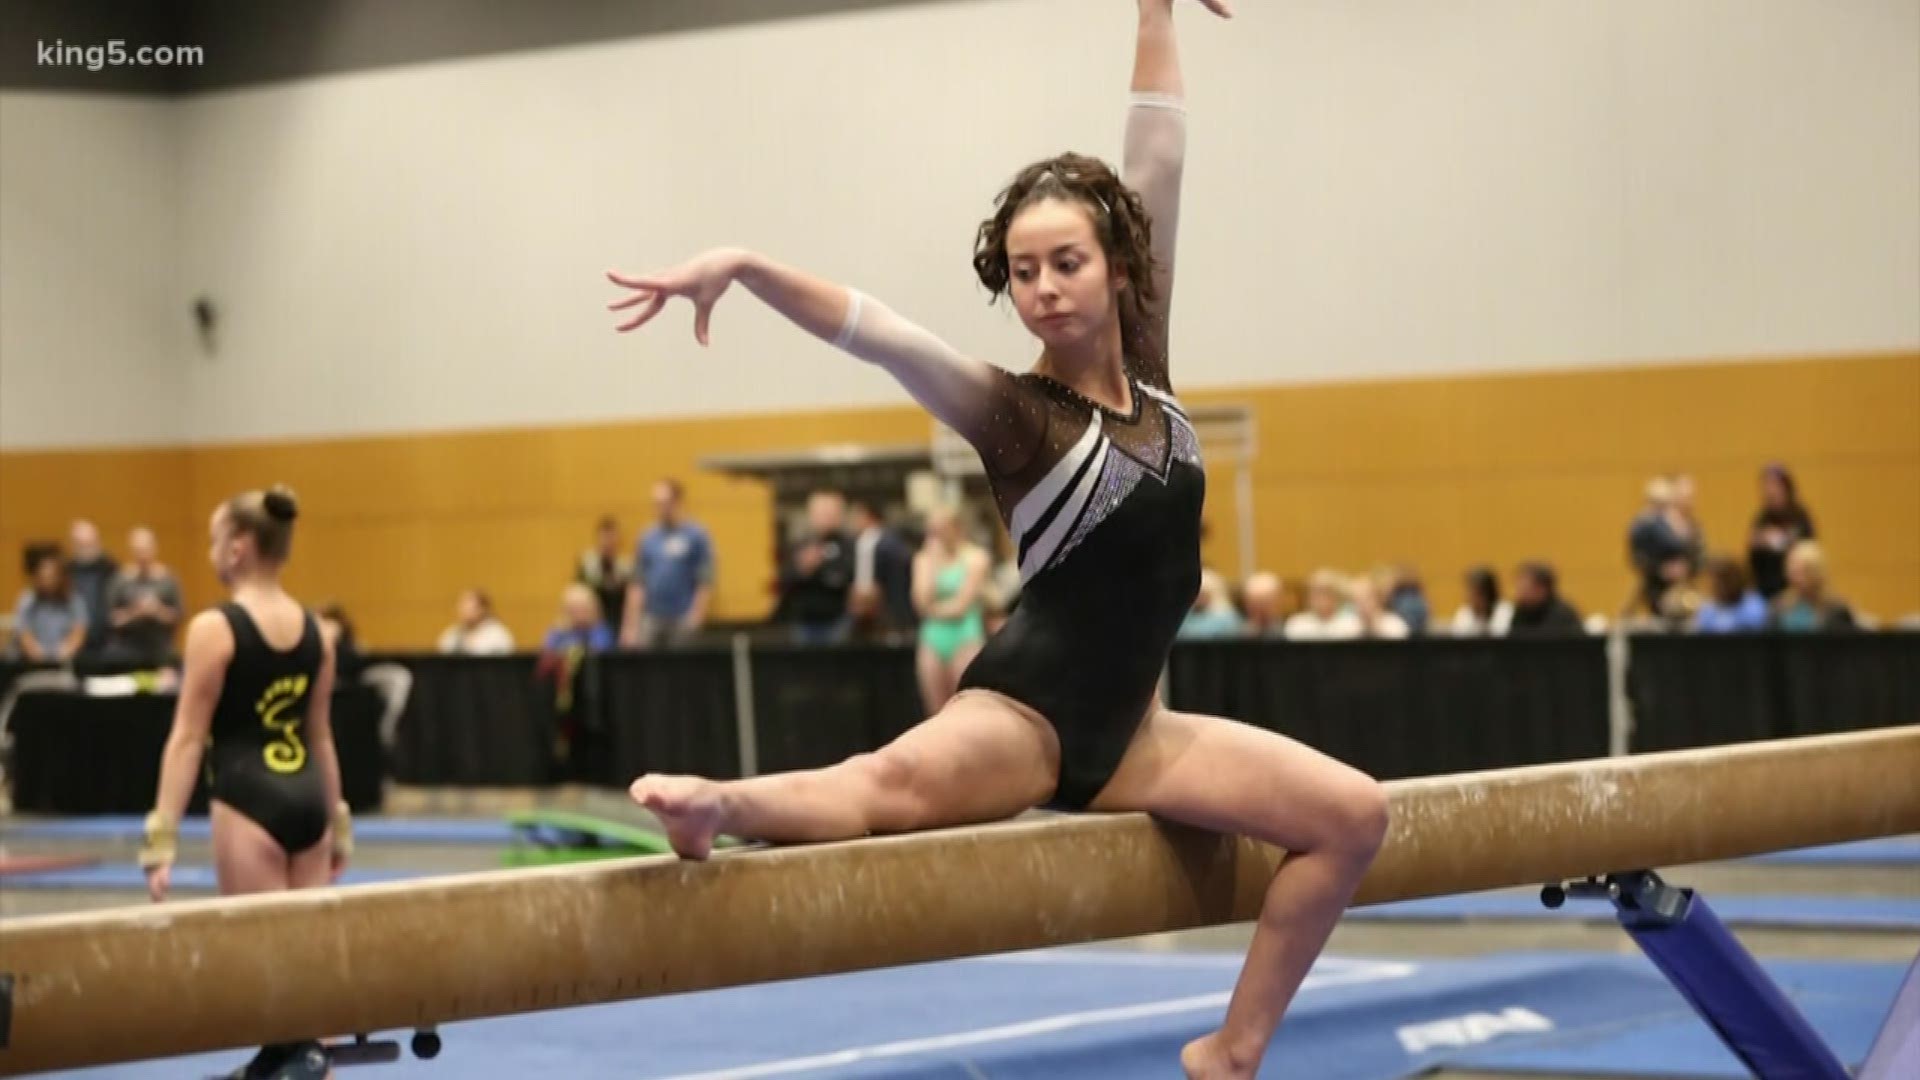 Morgan Ashley introduces us to a gymnast nearing recovery and taking some state titles at the same time.